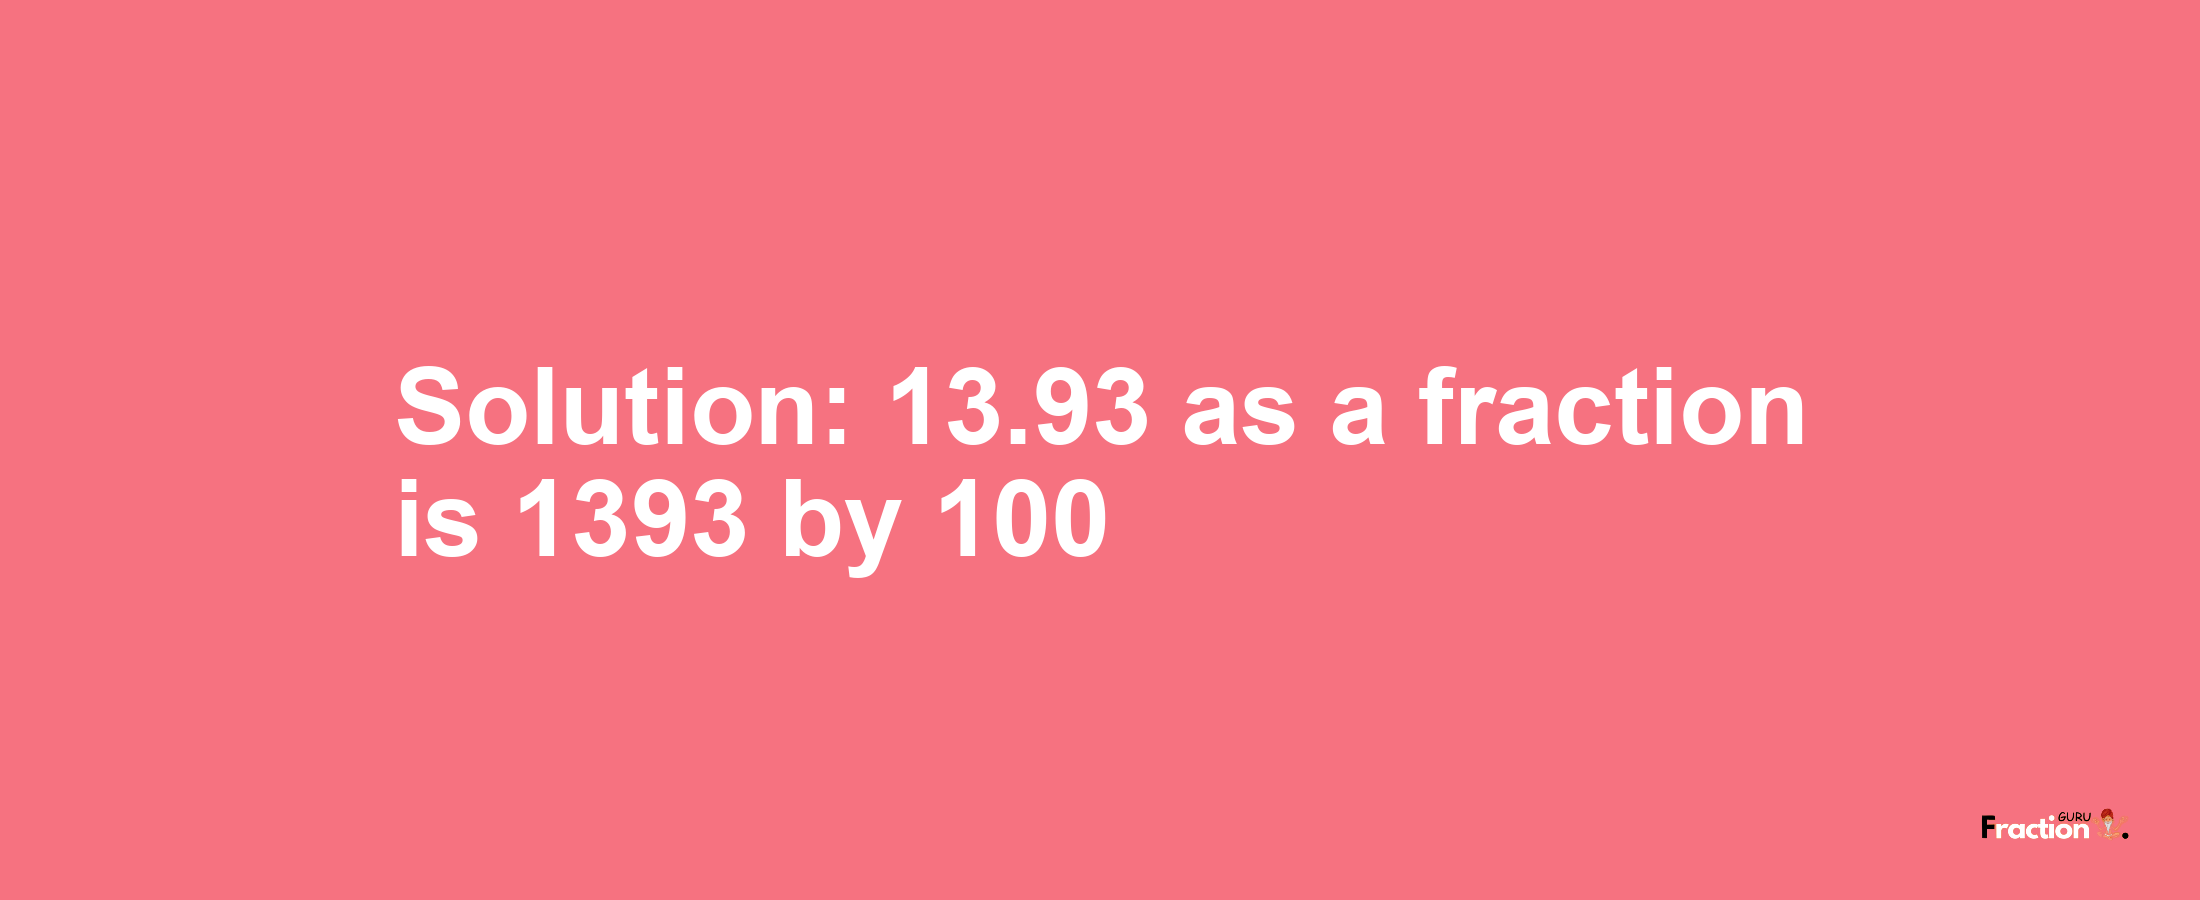 Solution:13.93 as a fraction is 1393/100